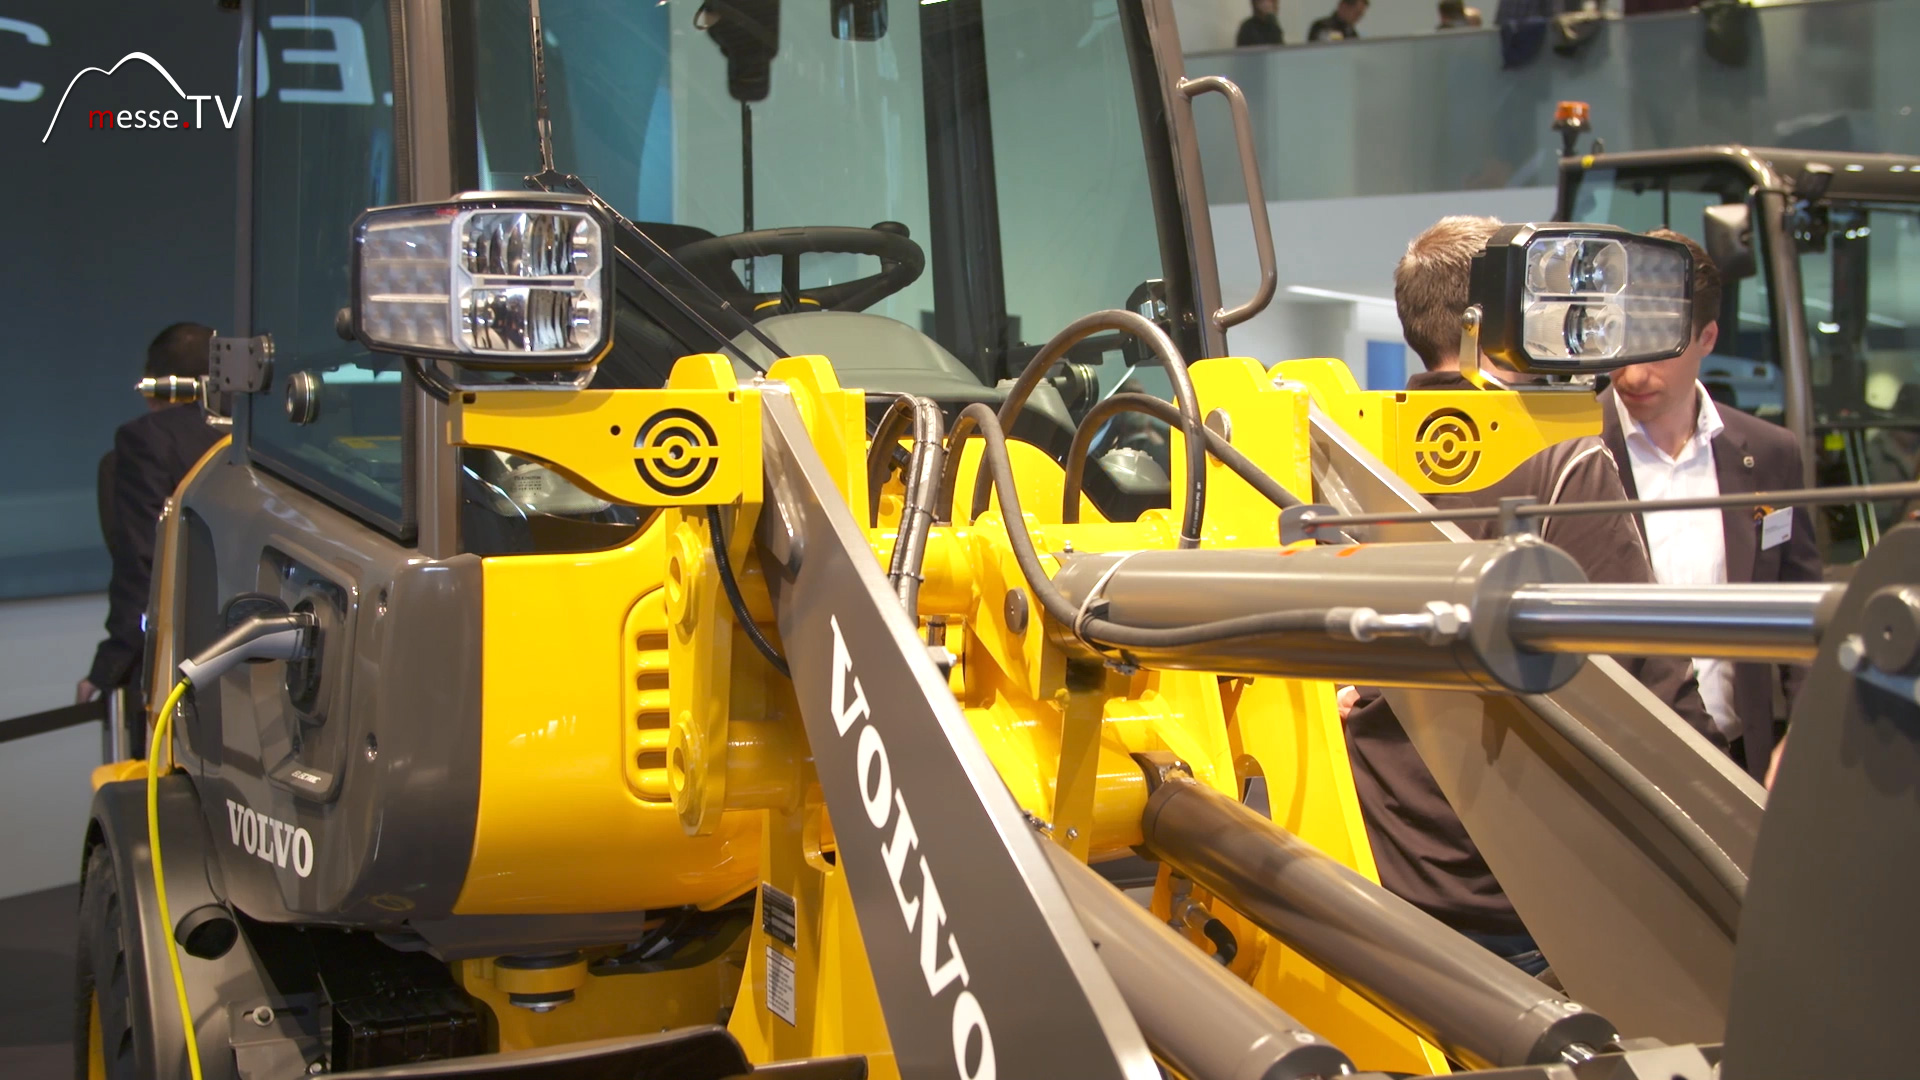 VOLVO fully electric construction machines for halls and indoors